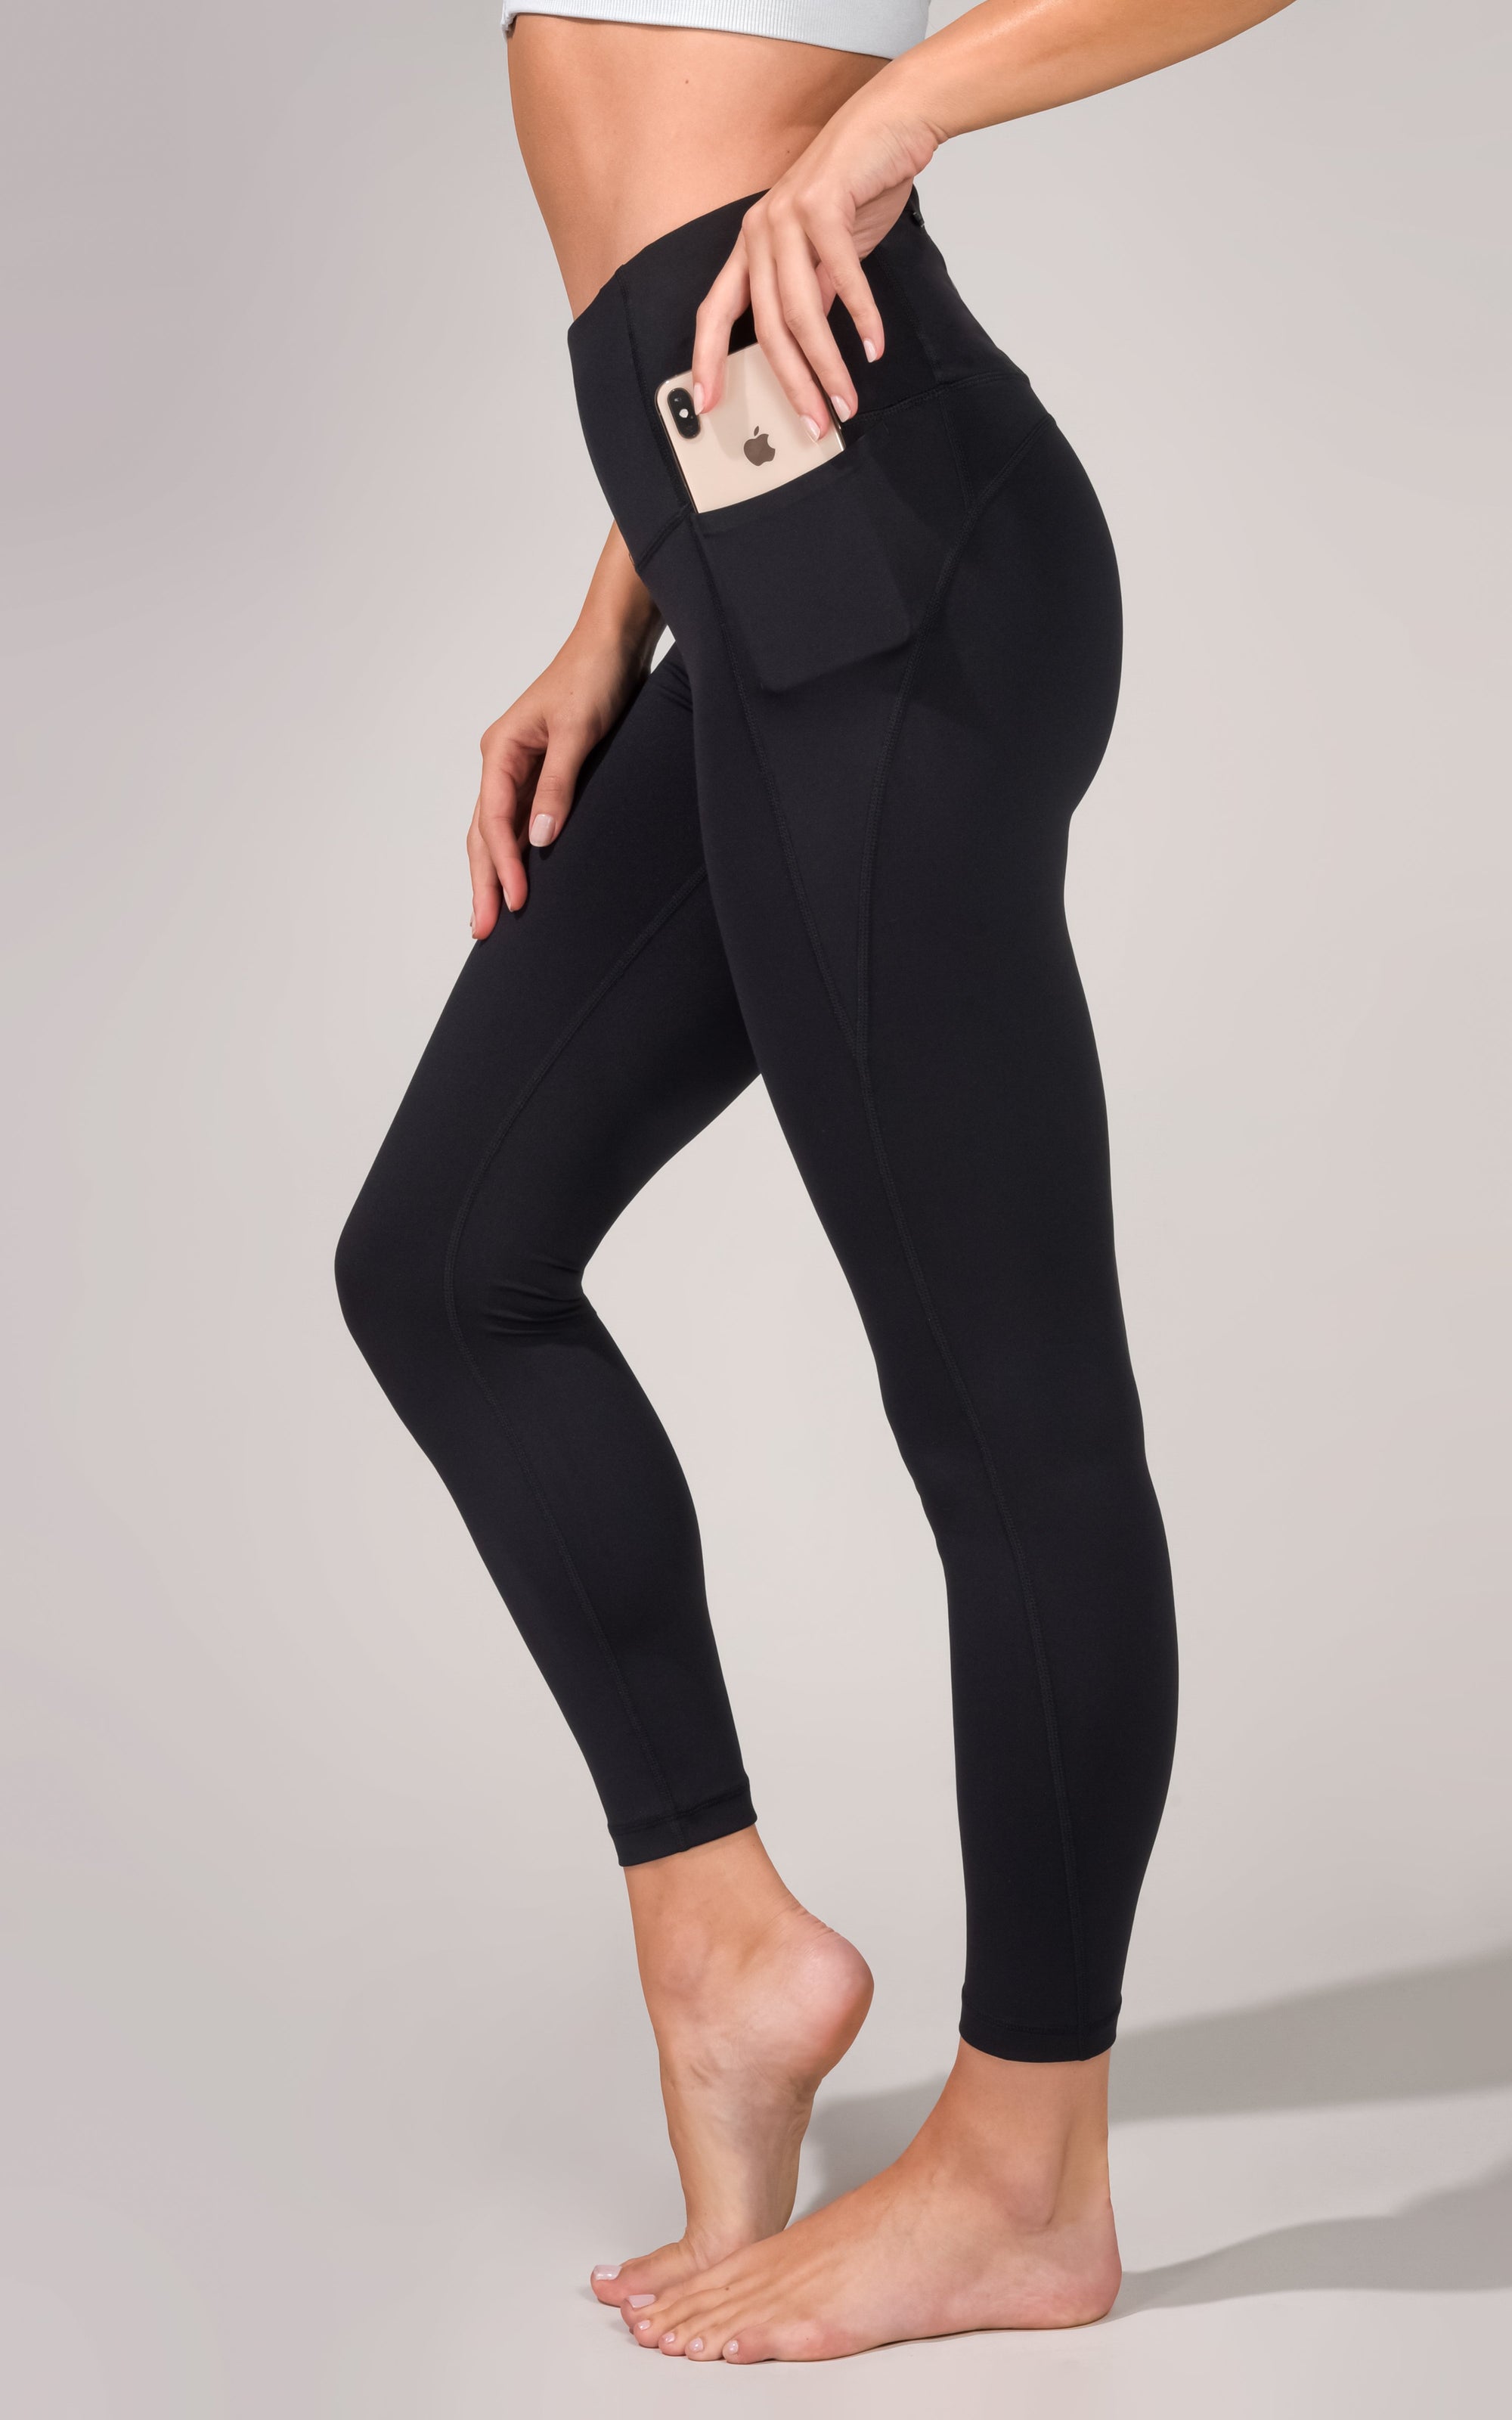 Yogalicious 'Lux High Waist 7/8 Ankle Length with Side Pocket And